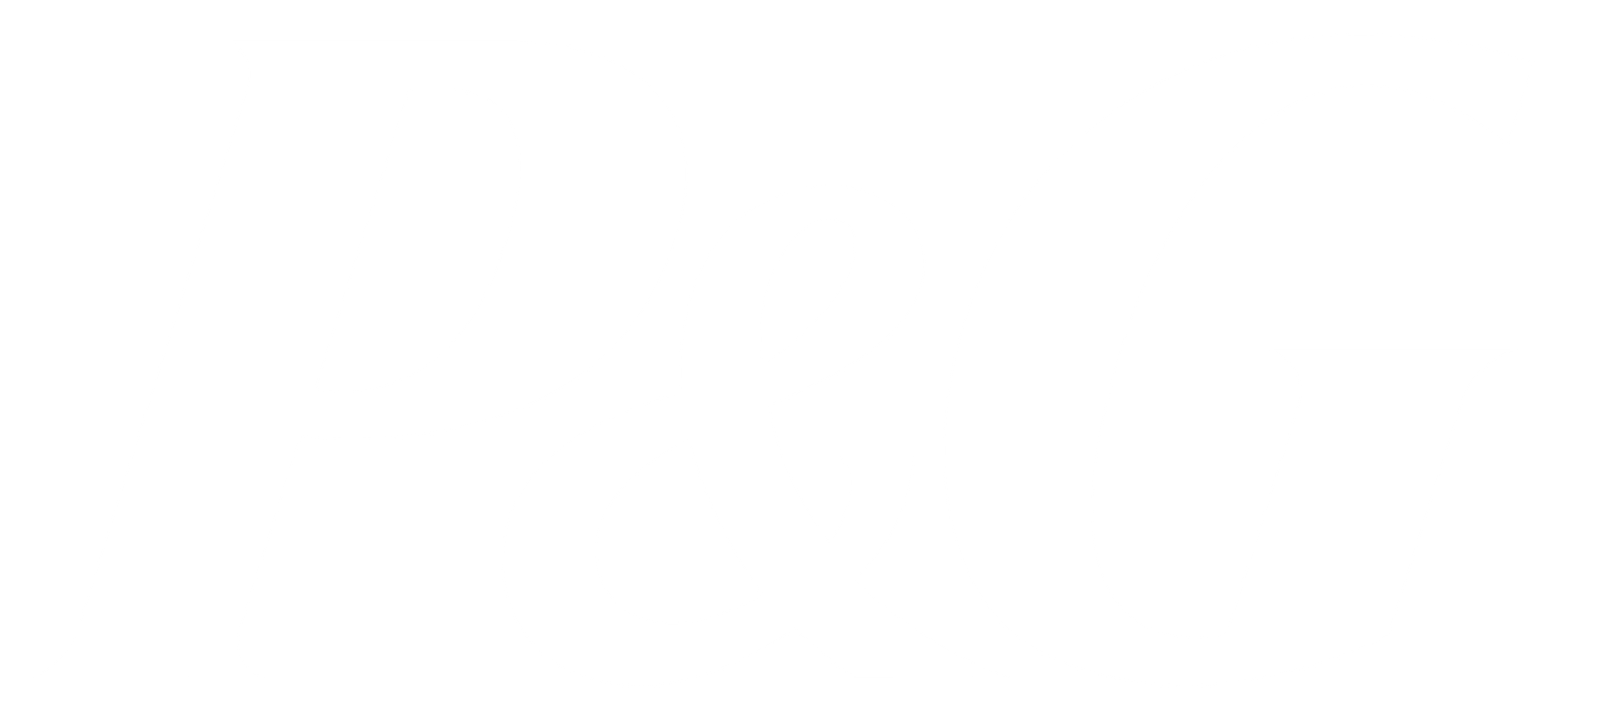 P_and_G_Procter_and_Gamble_logo-1